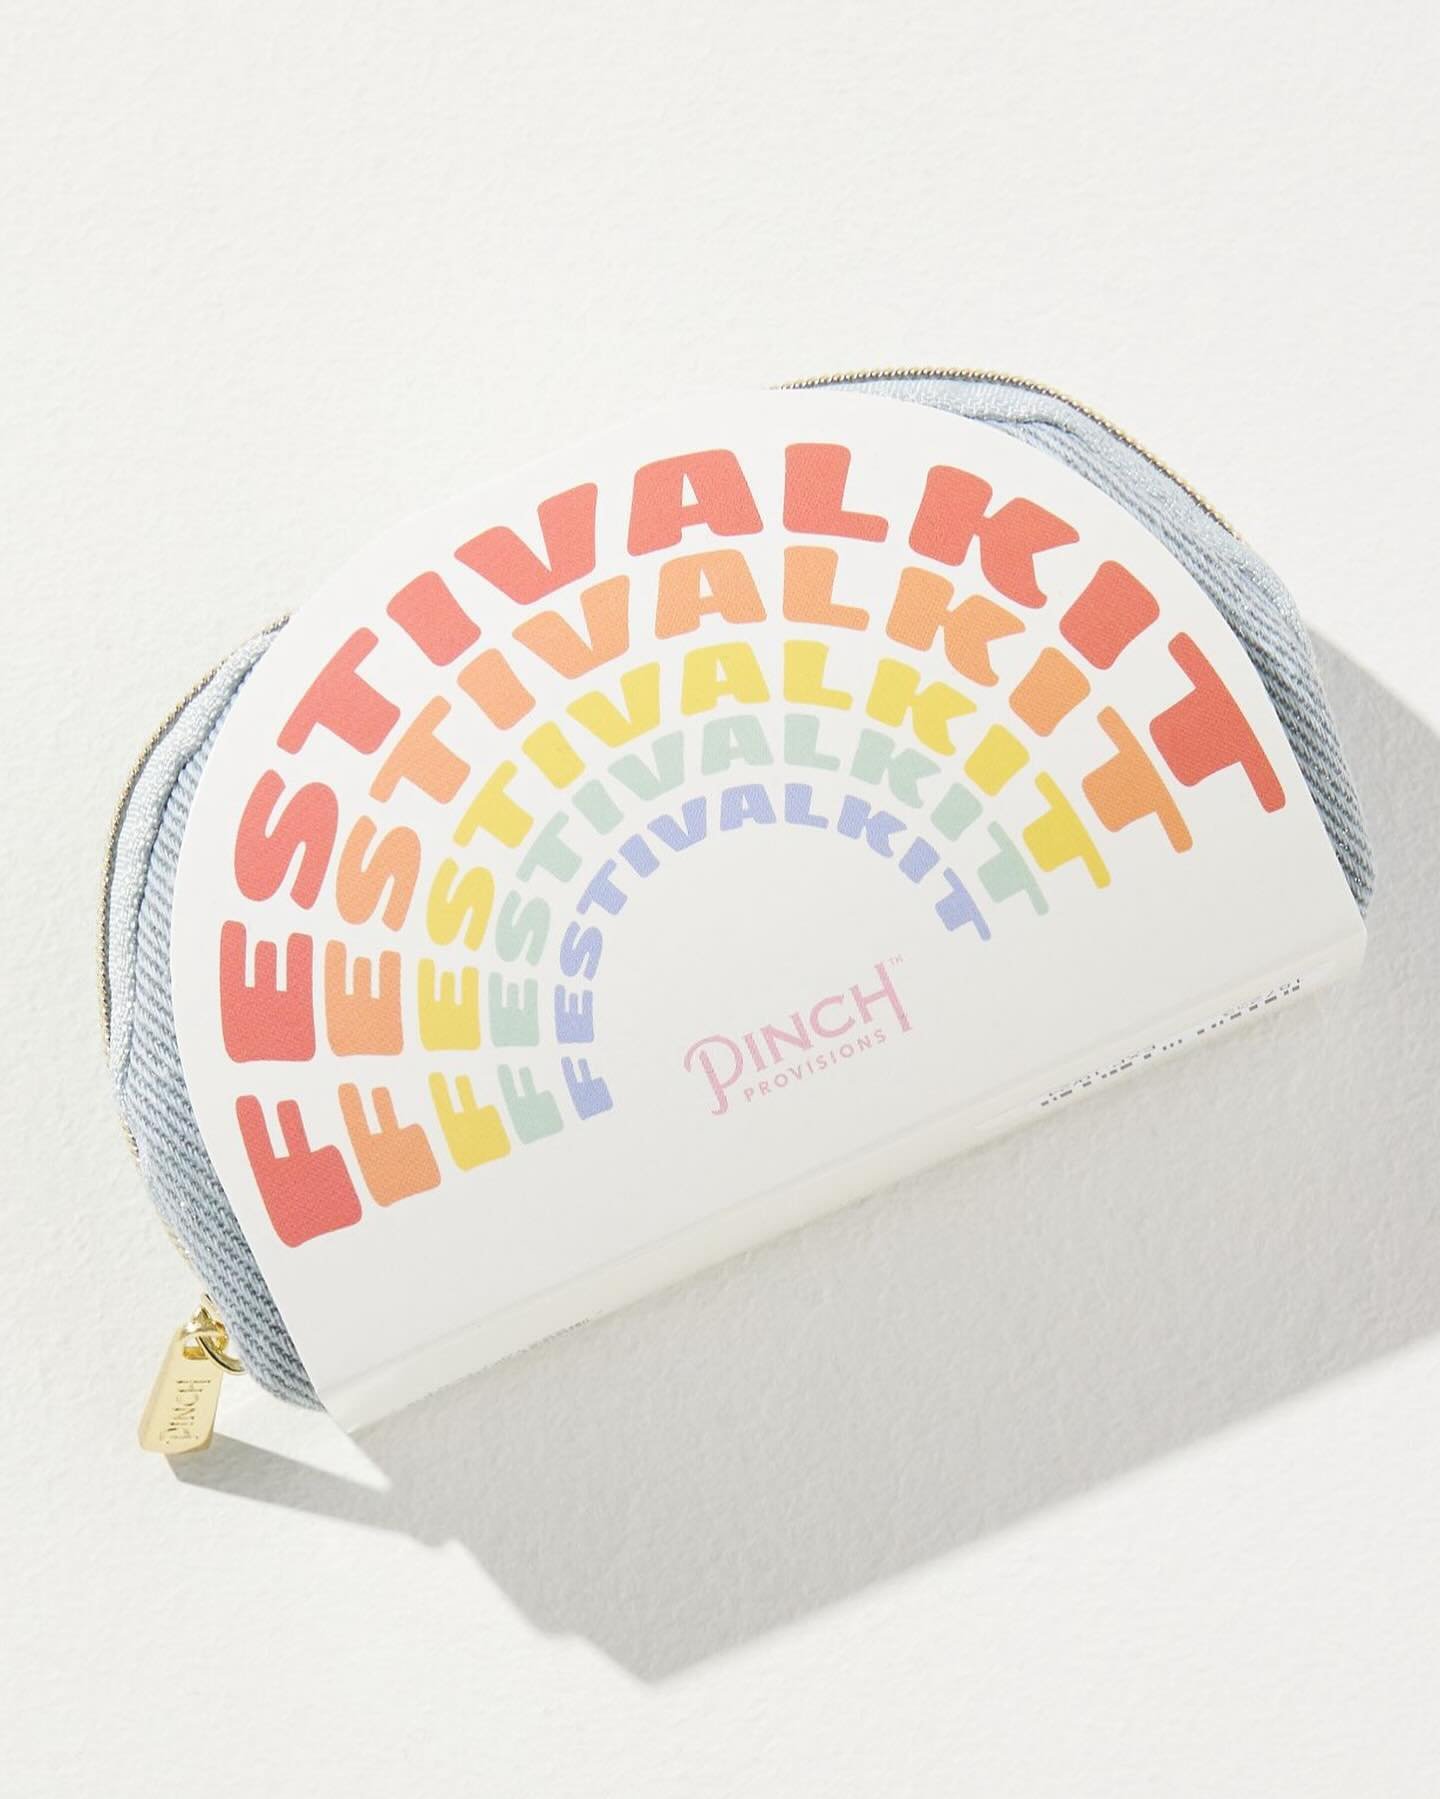 FESTIE BESTIES, we&rsquo;ve got you covered! Stash this 12-piece Festival Kit by Pinch Provisions in your belt bag and focus on what matters: the music, the dancing and the fun. The slim demin pouchette is full of fest aid essentials! 

🌈 Includes b